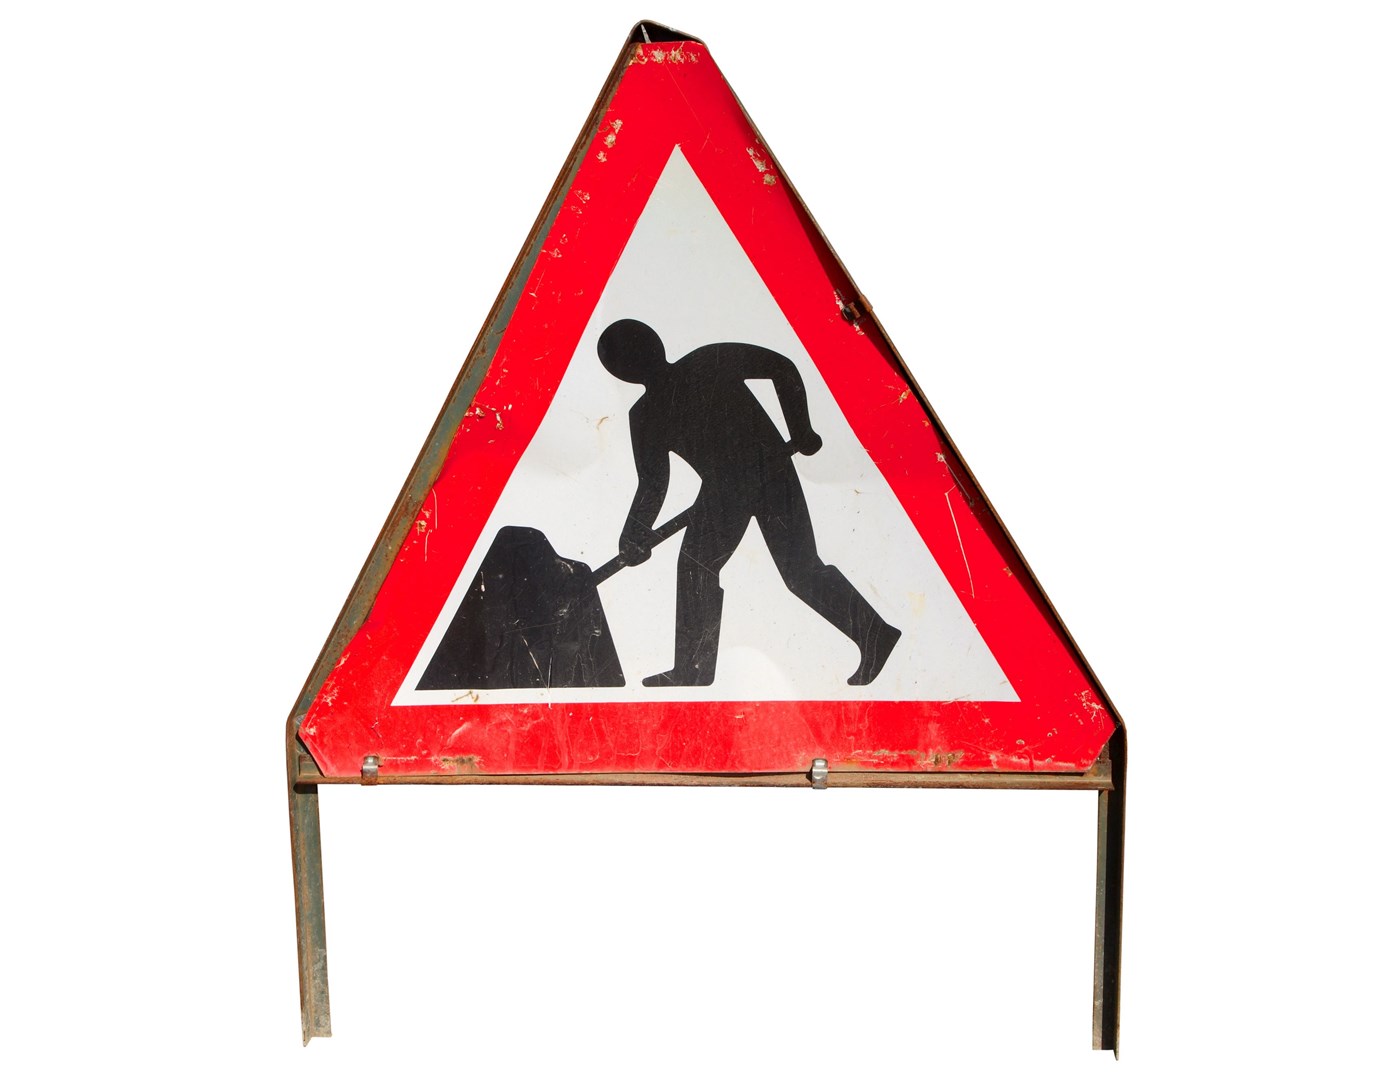 Roadworks will be taking place on A86 in Badenoch tomorrow